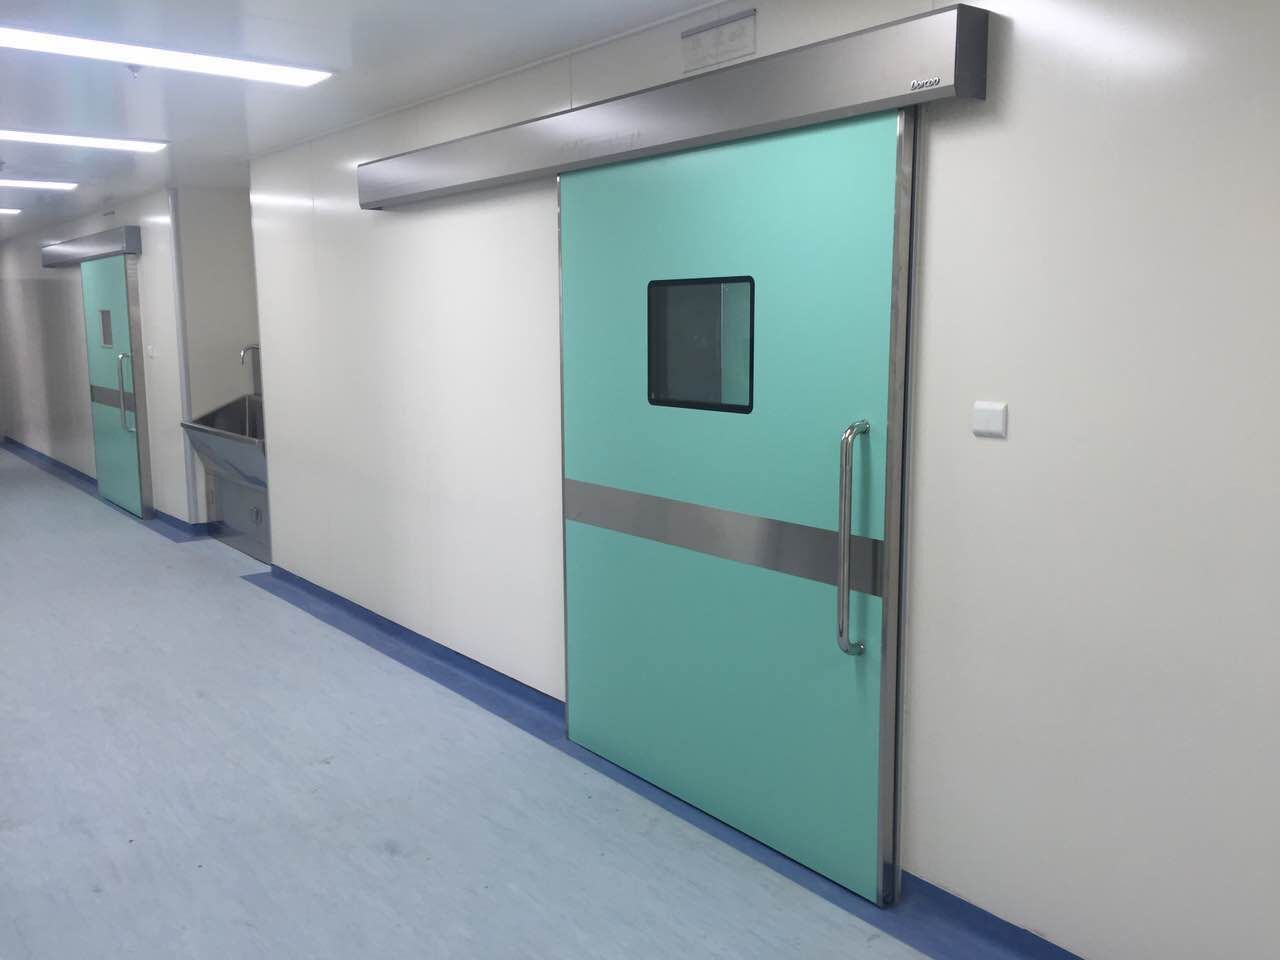 Hermetic Automatic Sliding Door for Operation Room